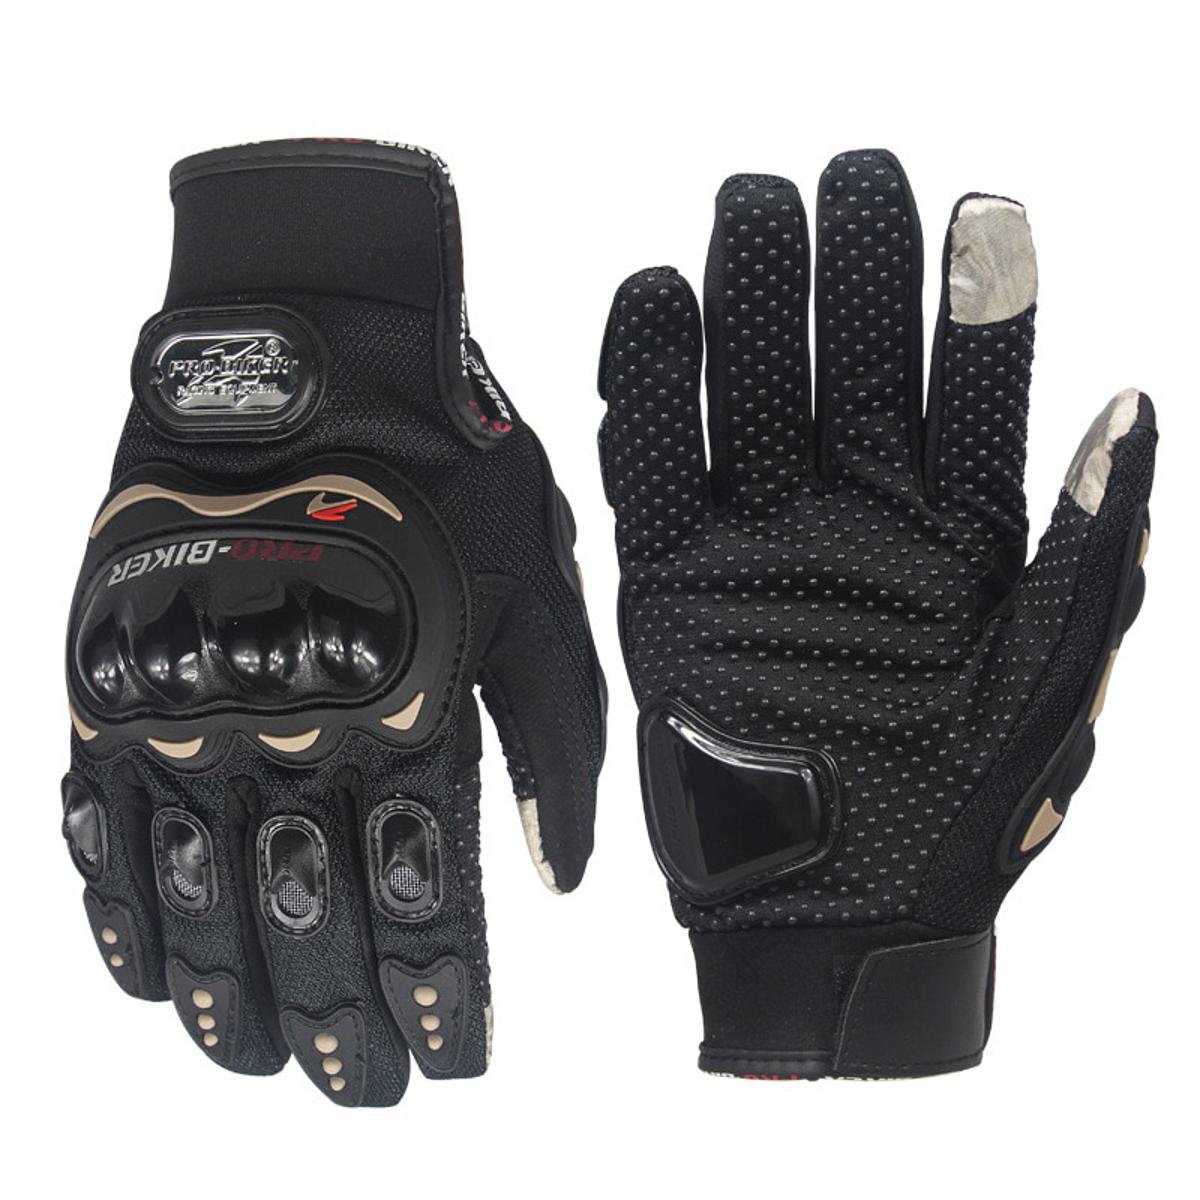 Inbike Winter Motorcycle Gloves Cold Weather Thermal Full Finger Motor